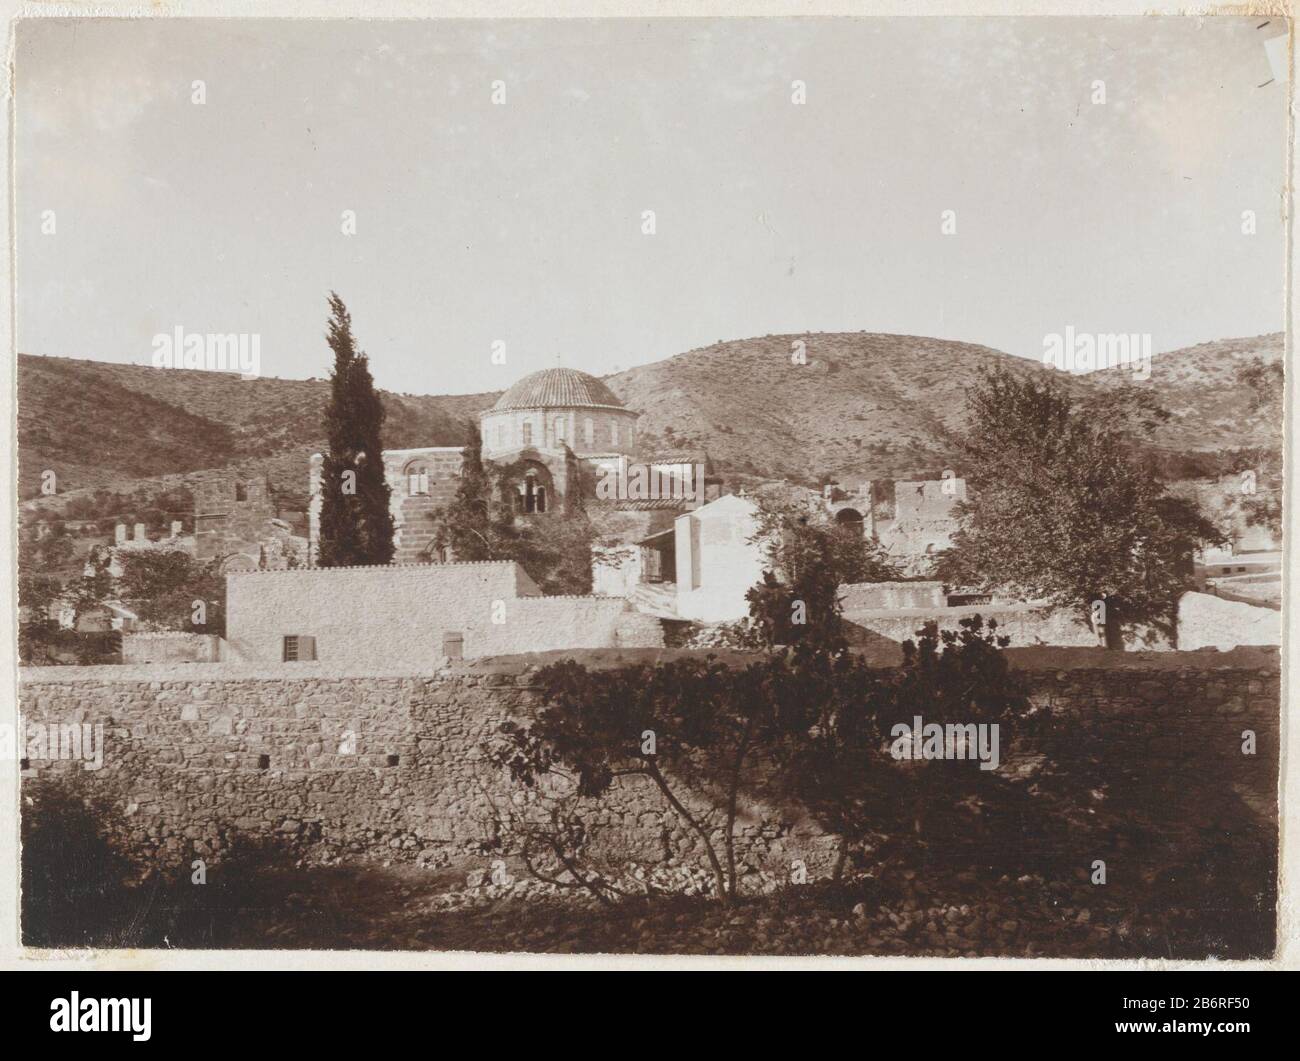 Gezicht op het klooster van Daphni, nabij Athene, Griekenland Klooster Daphni View of the Monastery of Daphni, near Athens, Greece Monastery Daphni Object Type : picture Item number: RP-F 1999-139-1-12 Manufacturer : Photographer: L. Heldringstraat Place manufacture: Greece Date: 1898 Physical features: daylight gelatin silver print material: paper technique: daylight gelatin silver print dimensions: h 82 mm × W 110 mm Stock Photo